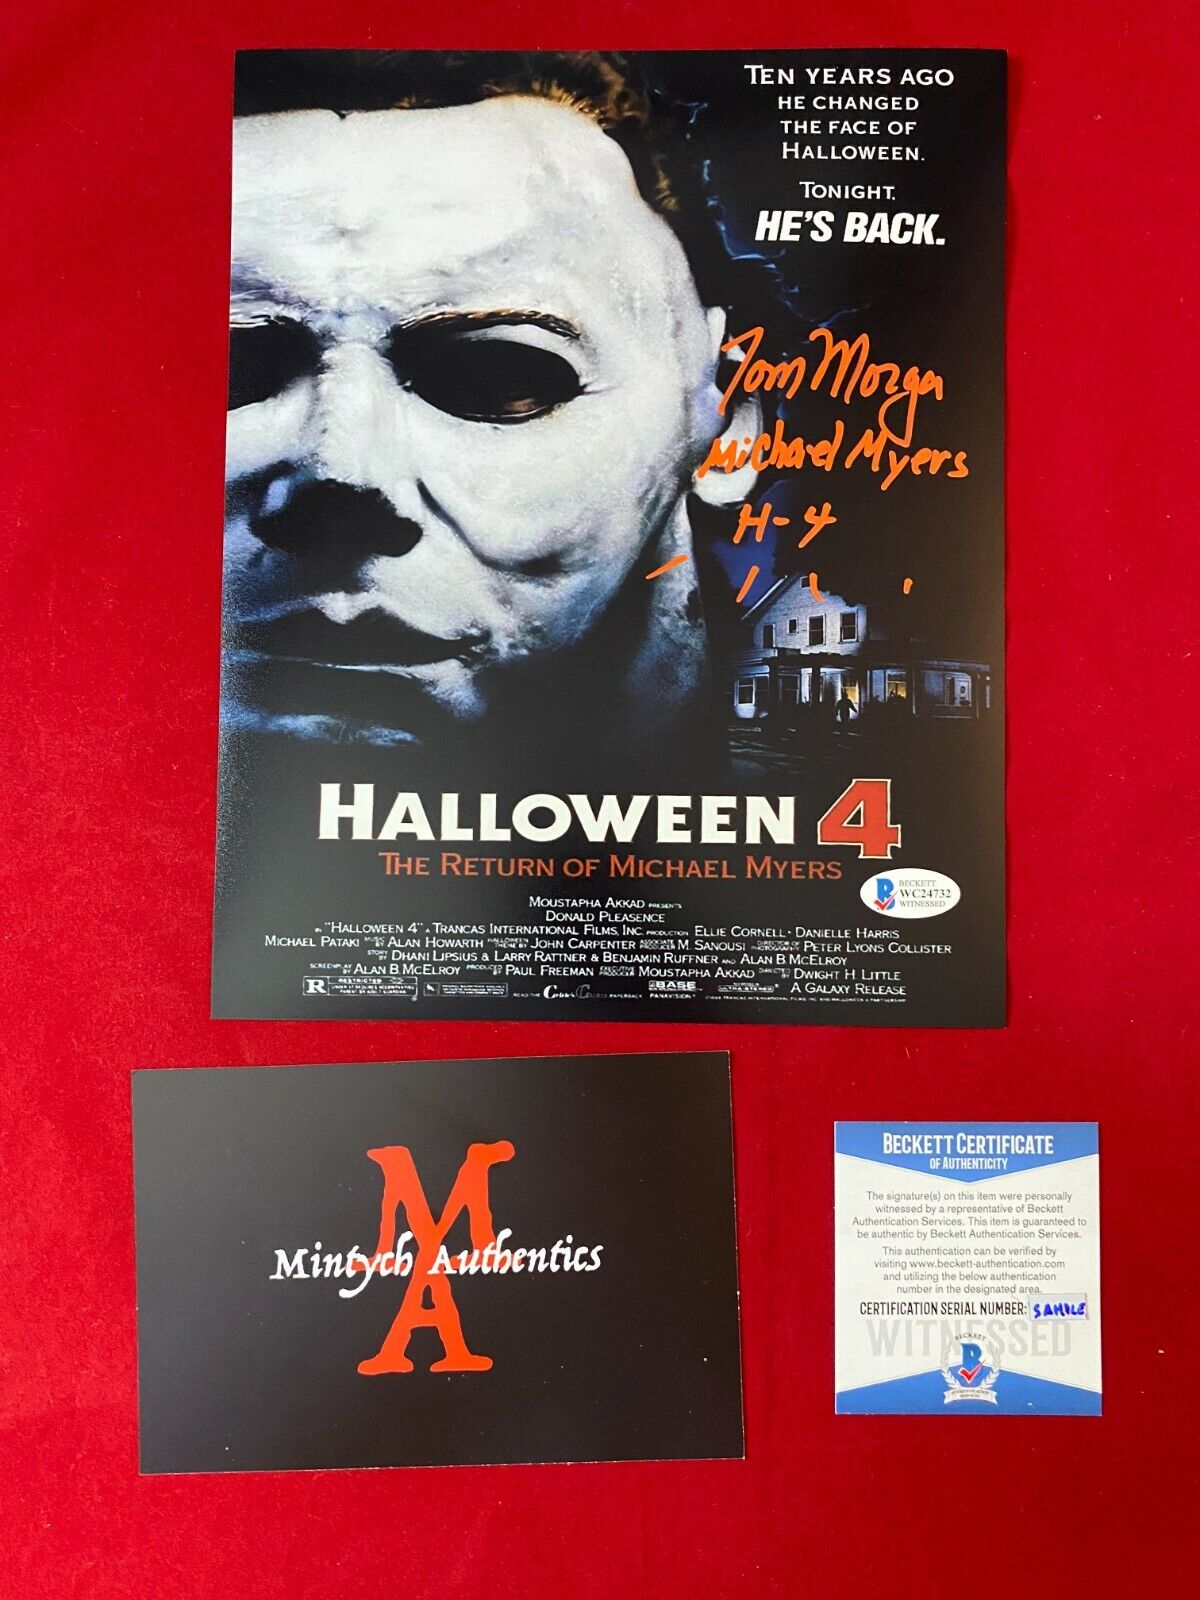 TOM MORGA AUTOGRAPHED SIGNED 8x10 Photo Poster painting! HALLOWEEN 4! MICHAEL MYERS! BECKETT COA